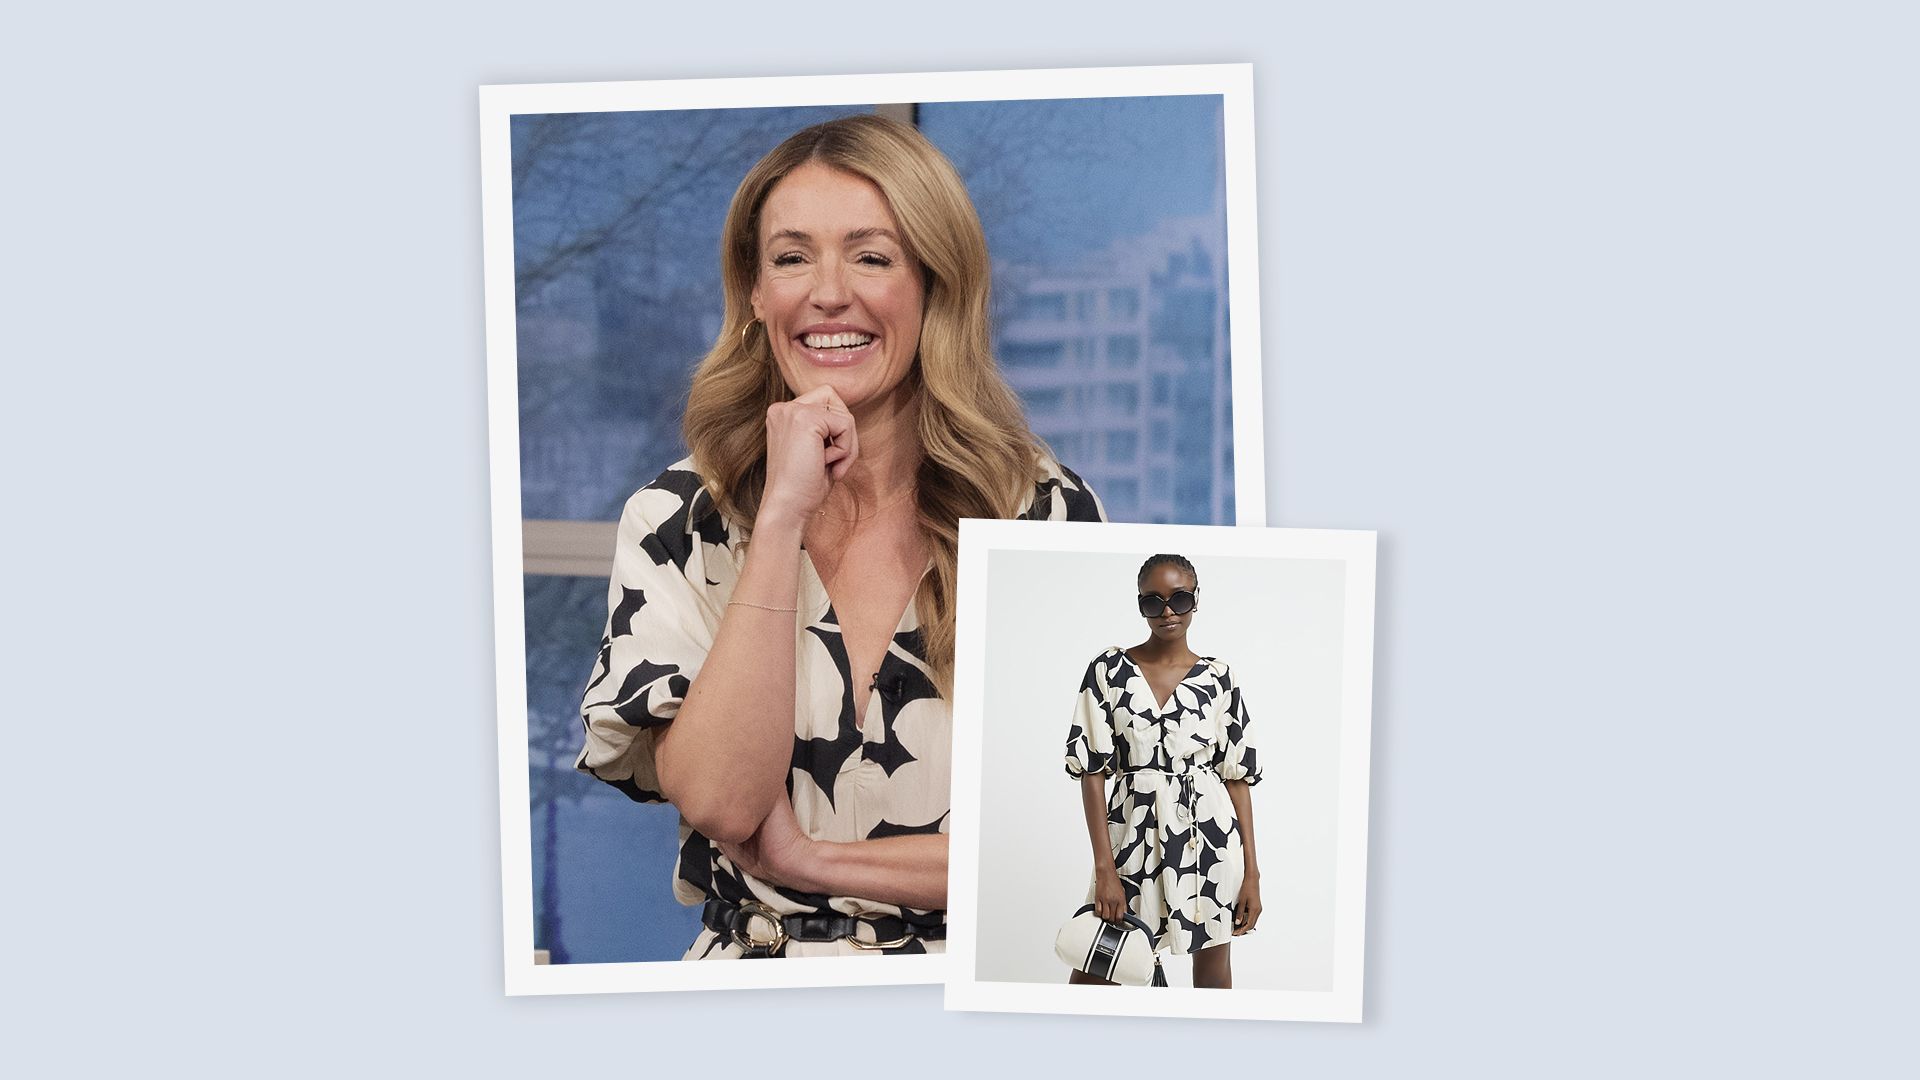 Cat Deeley's River Island This Morning dress